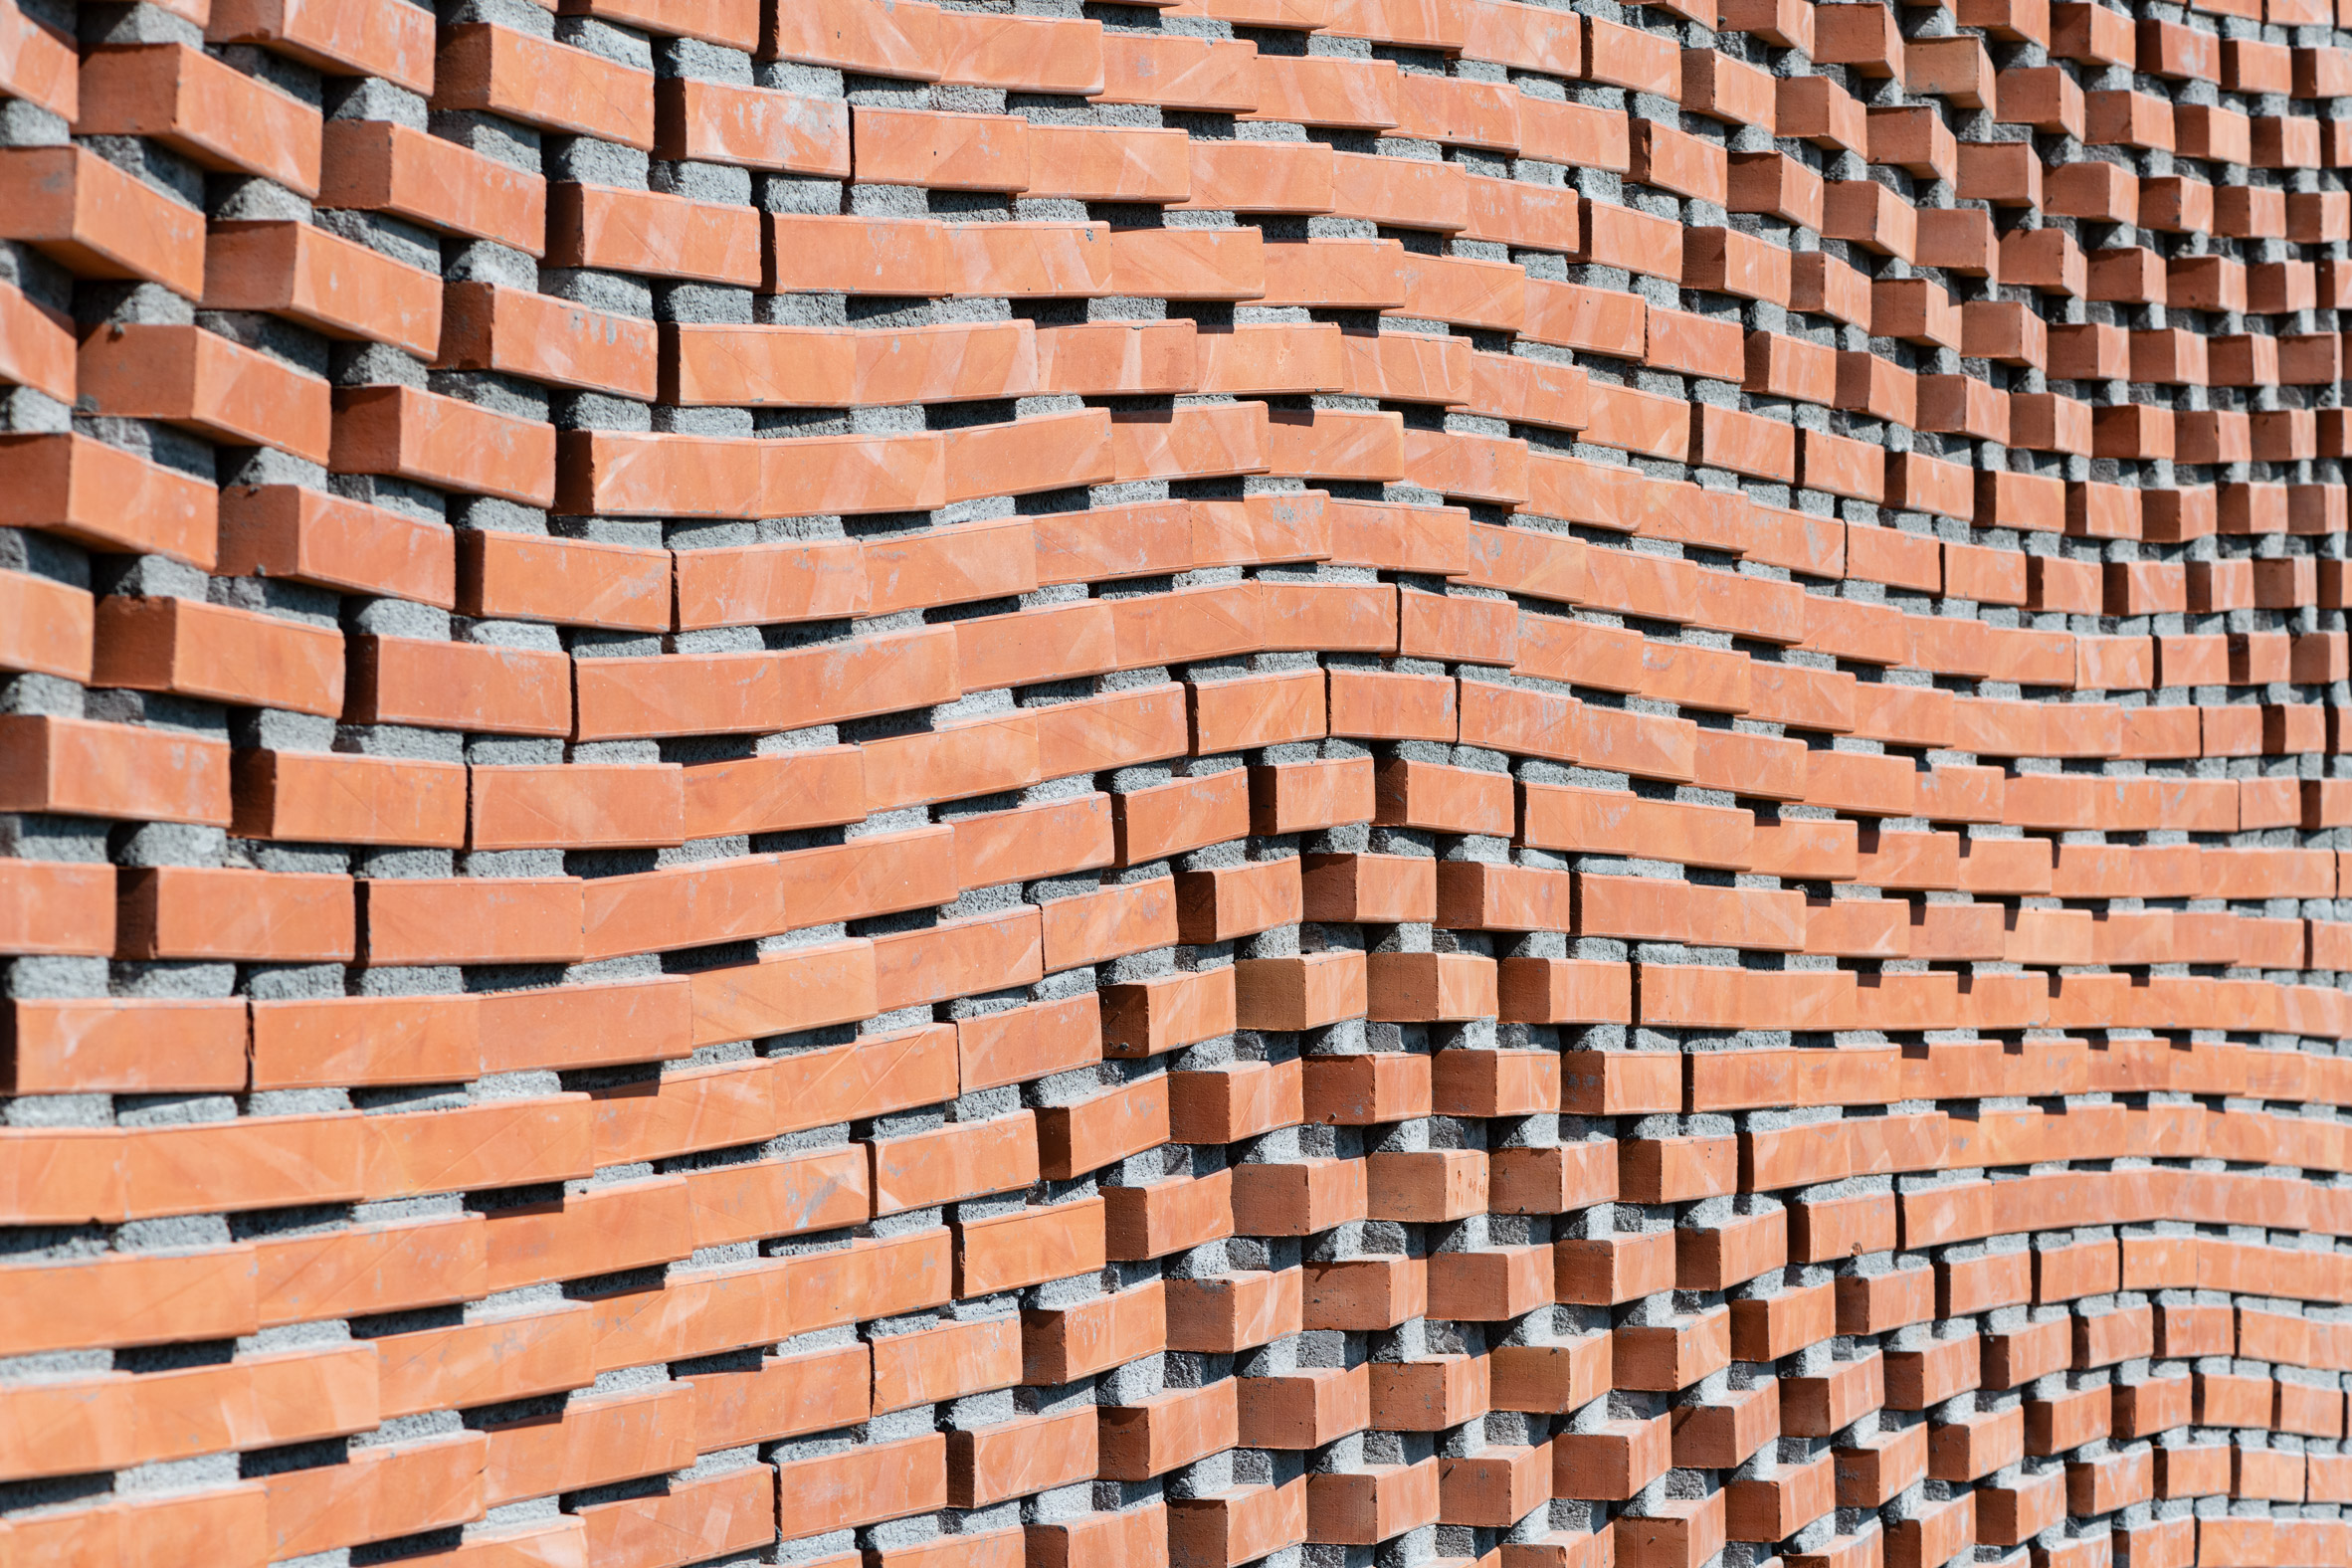 Kitrvs winery's parametric facades built using augmented bricklaying by Gramazio Kohler Research at ETH Zürich